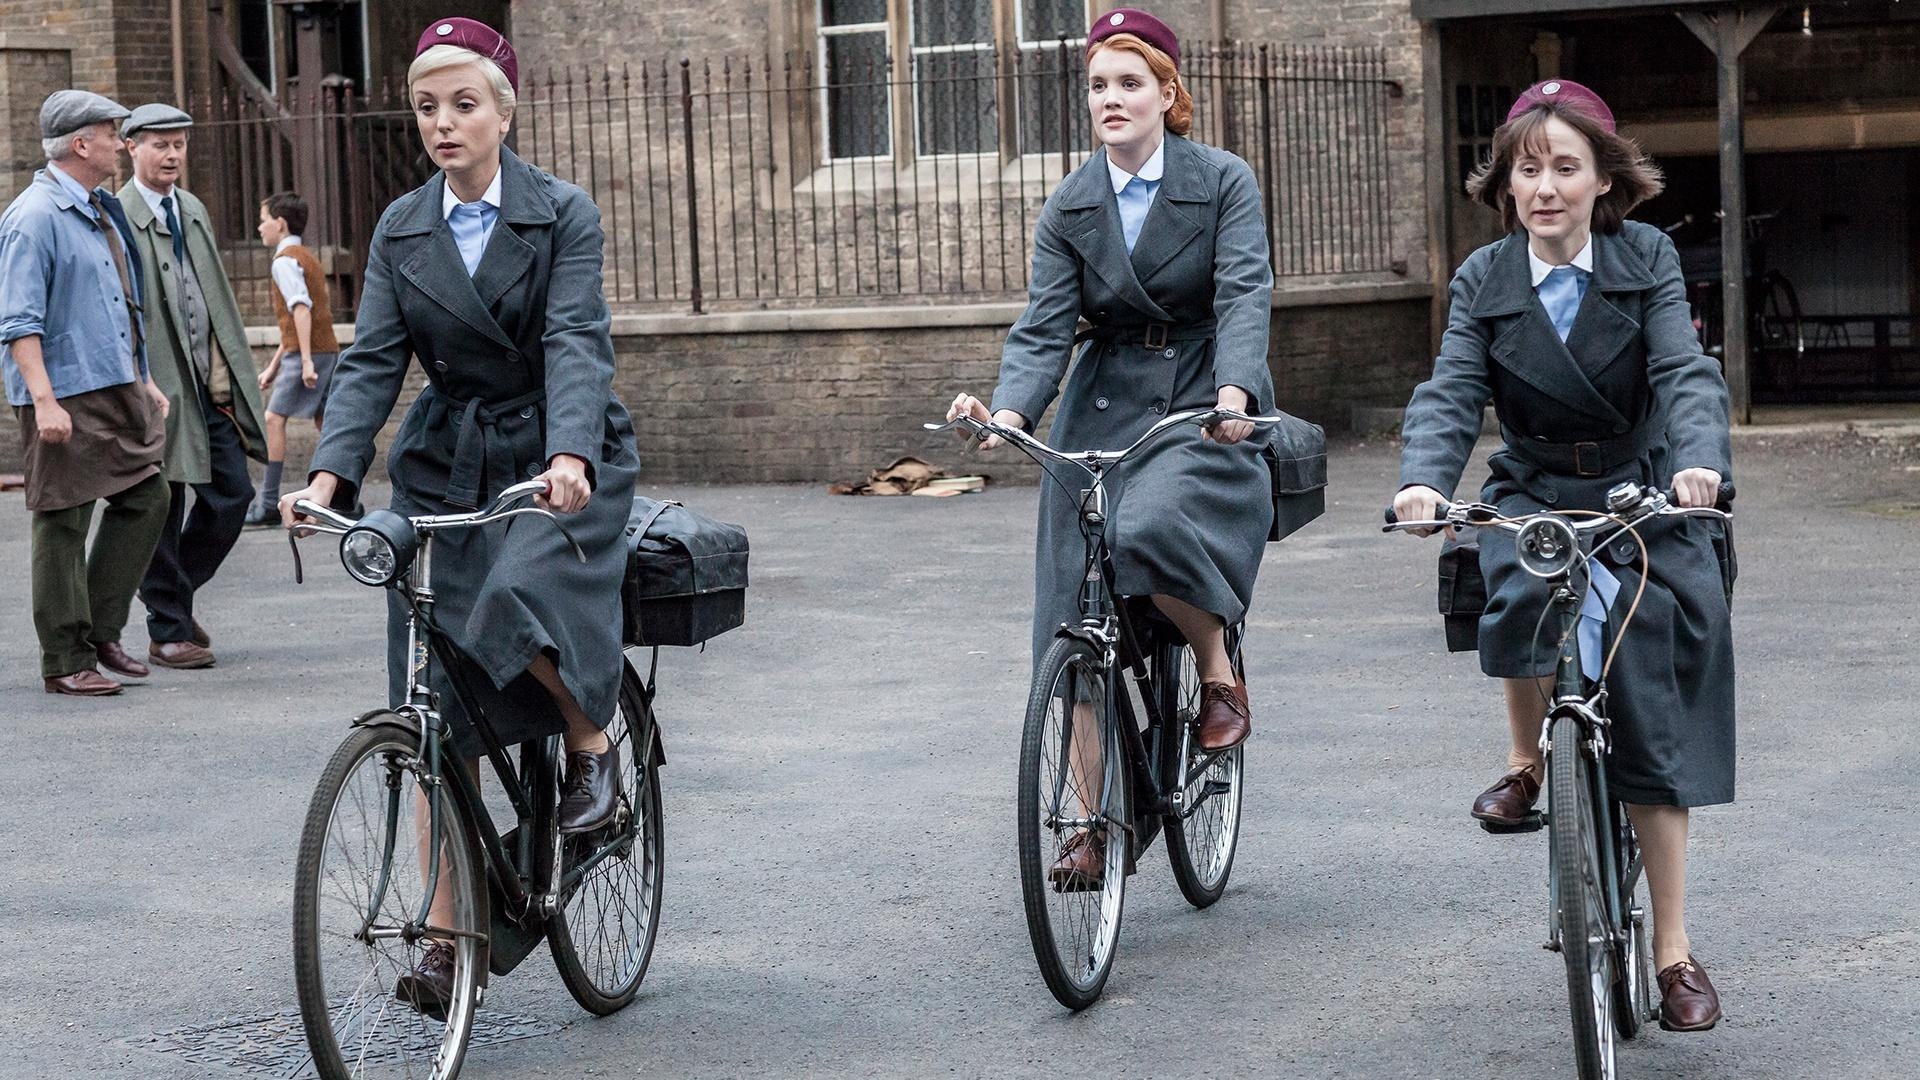 Call The Midwife Laptop Wallpaper posted by Sarah Walker 1920x1080